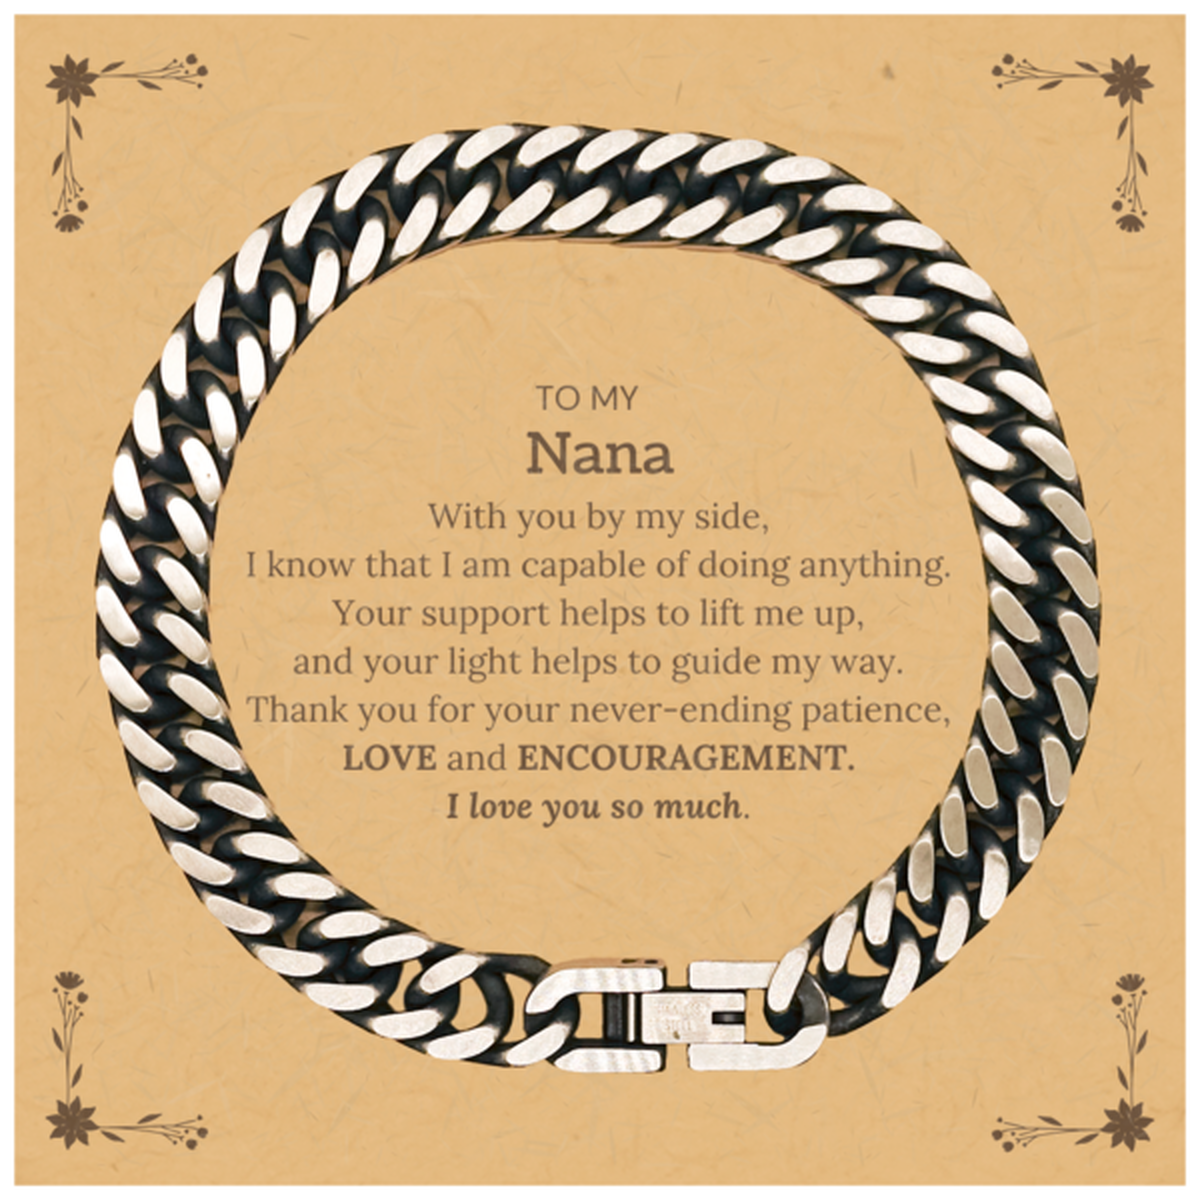 Appreciation Nana Cuban Link Chain Bracelet Gifts, To My Nana Birthday Christmas Wedding Keepsake Gifts for Nana With you by my side, I know that I am capable of doing anything. I love you so much